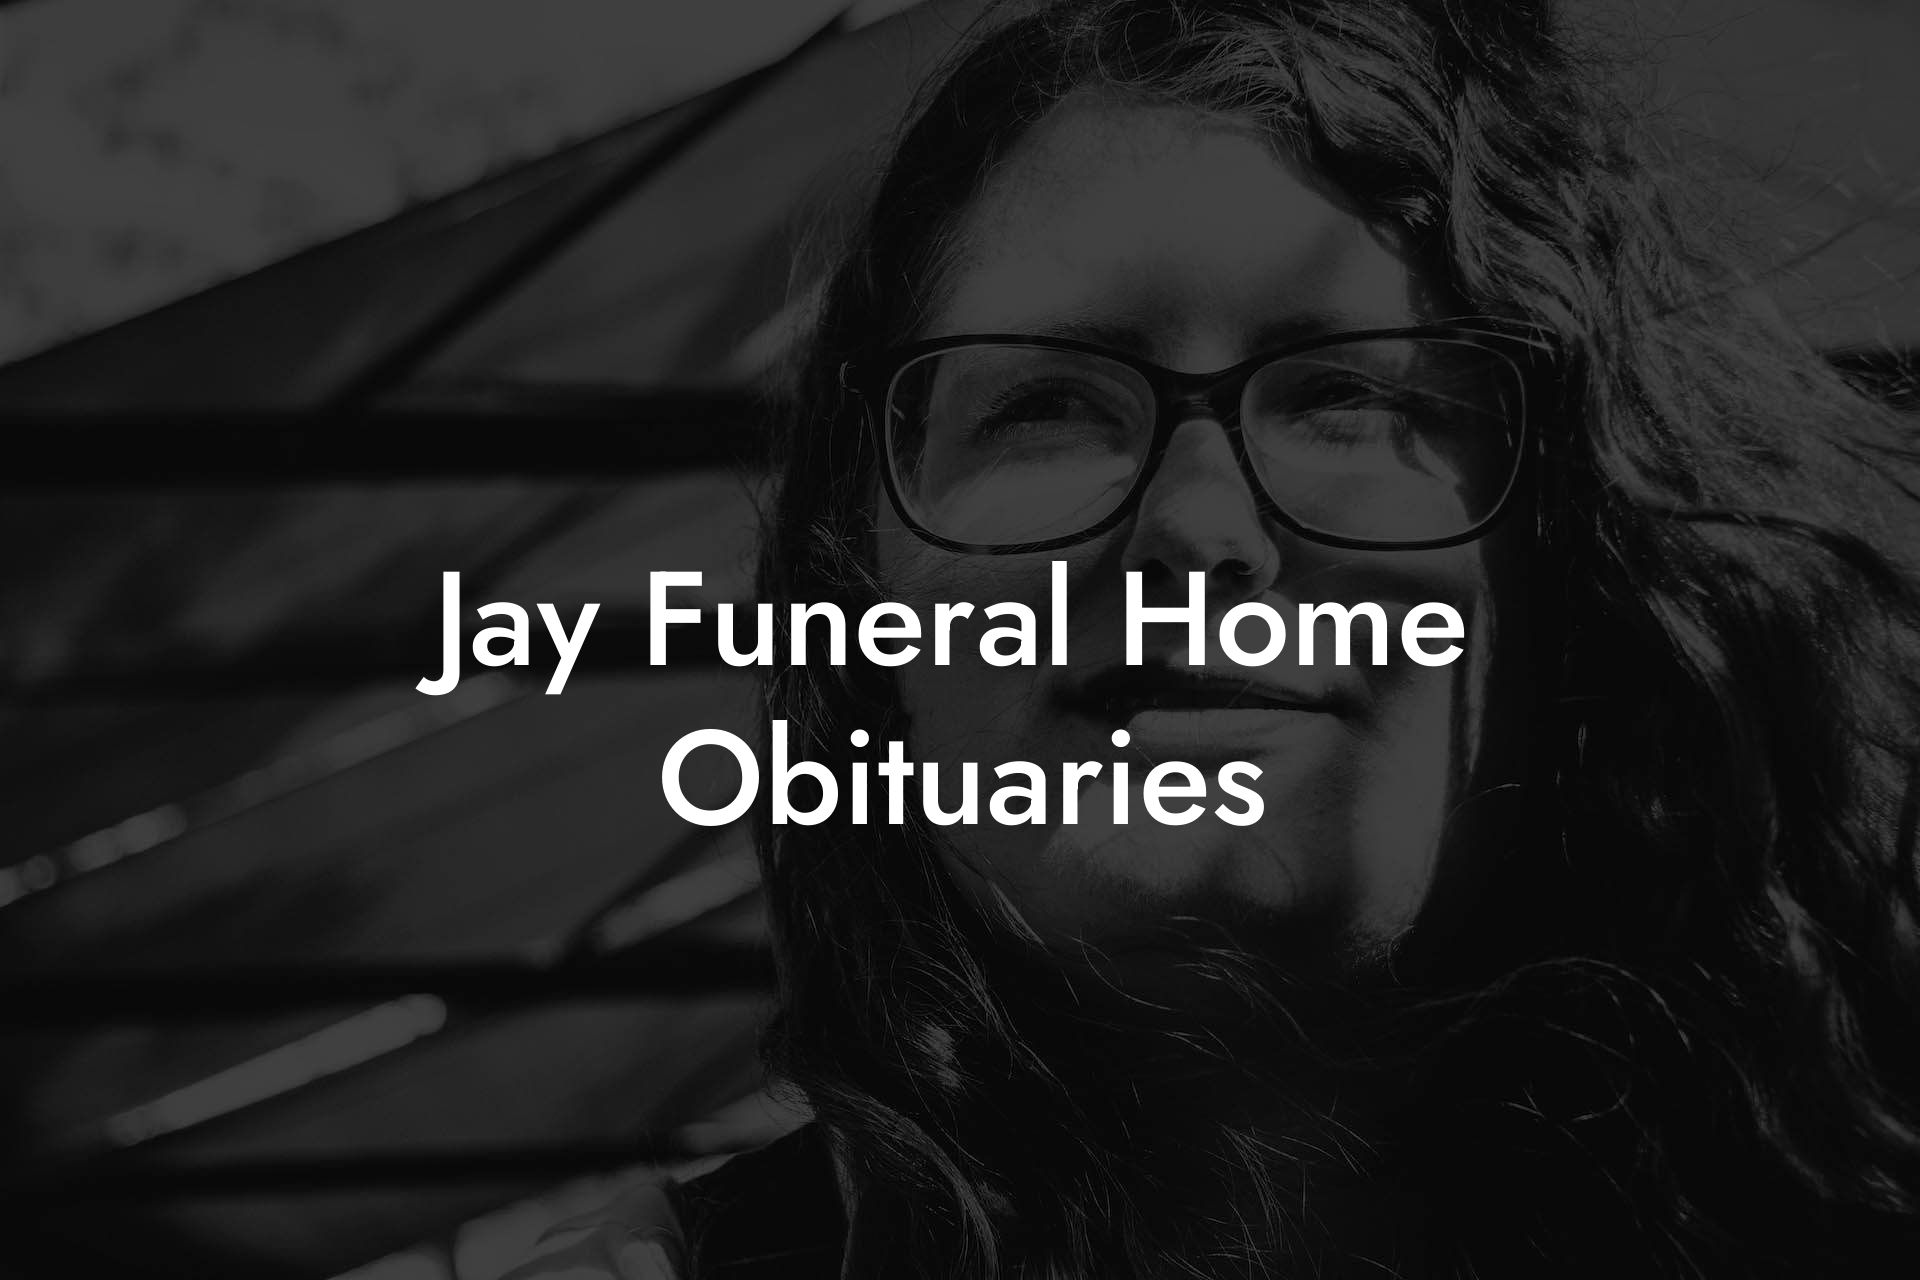 Jay Funeral Home Obituaries